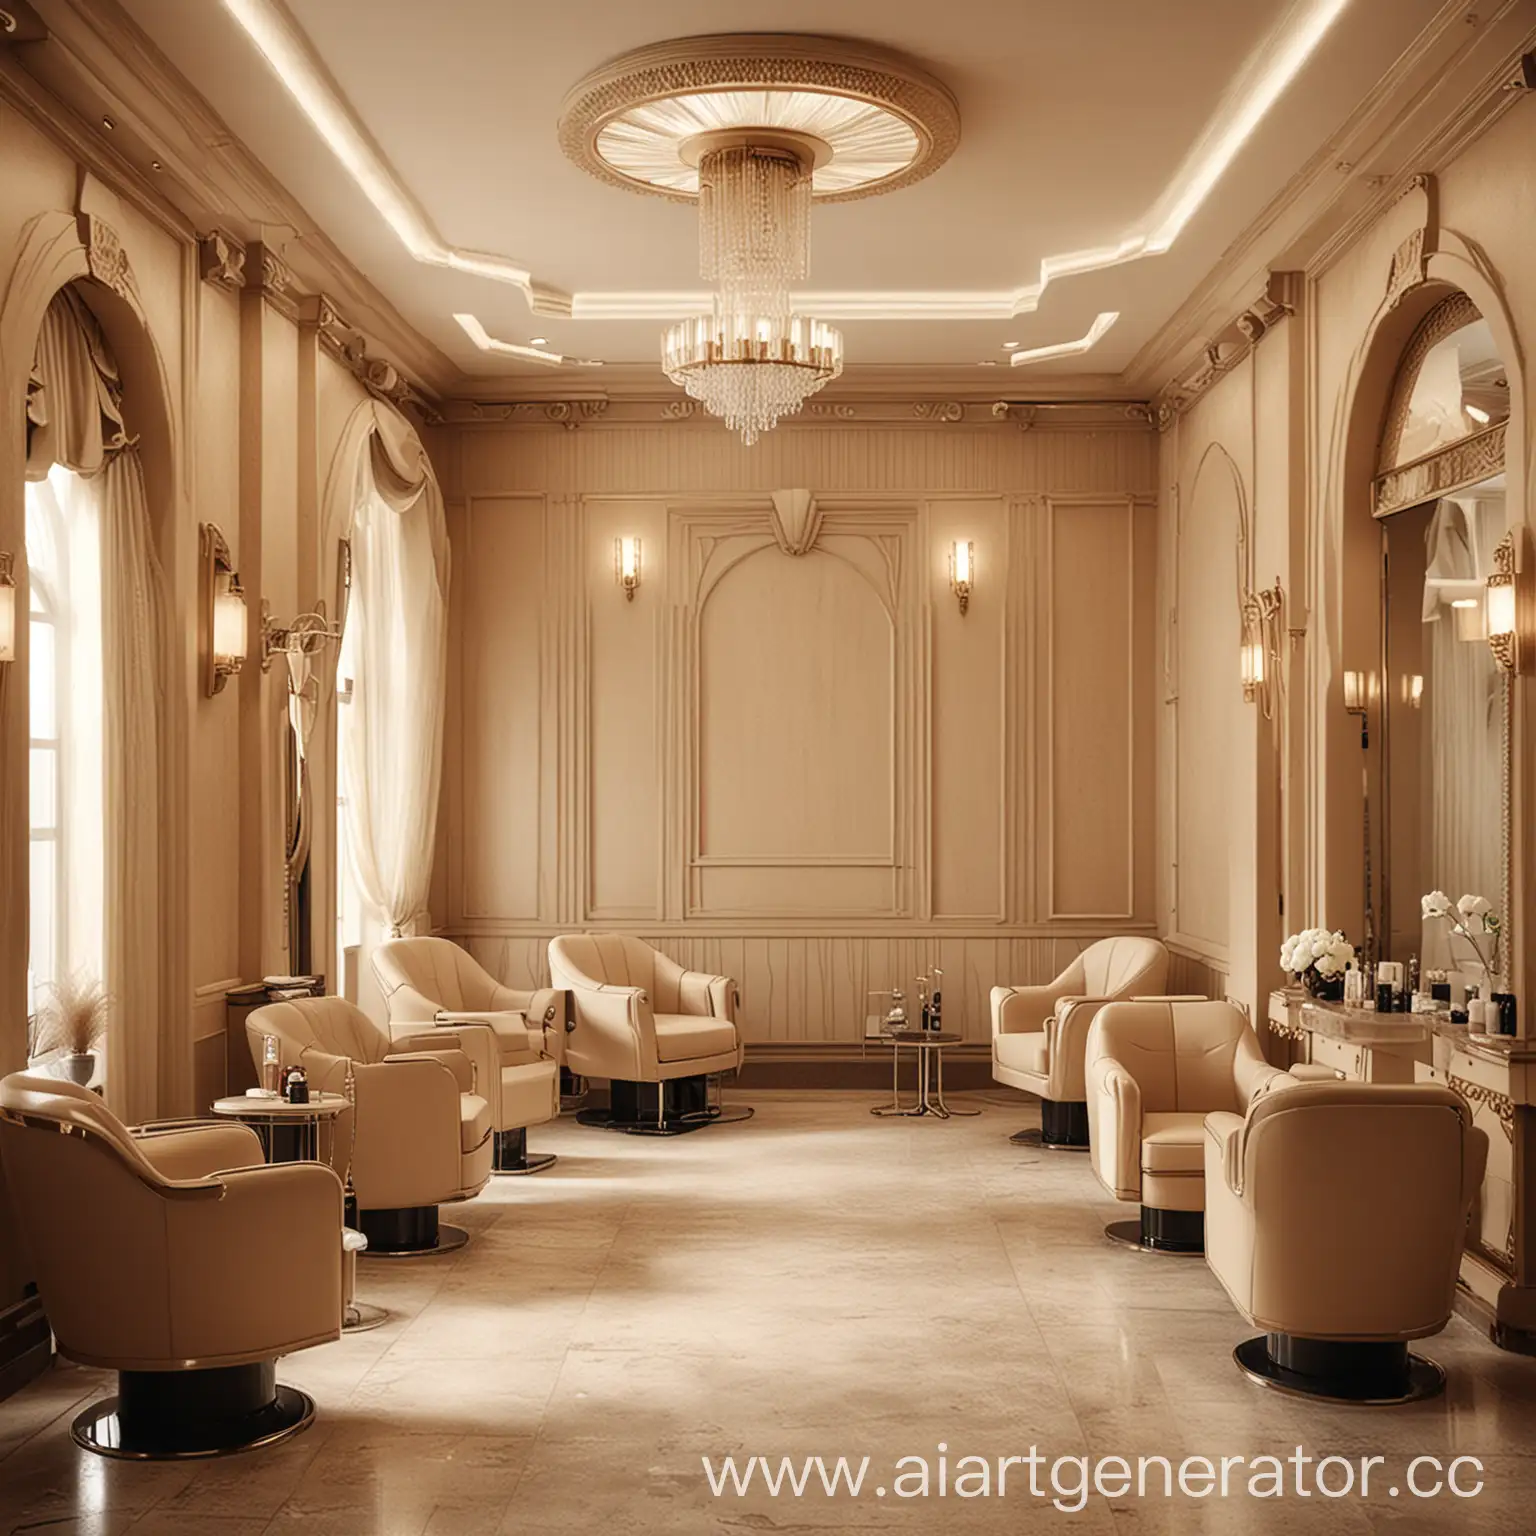 Fashionable-Salon-in-Art-Deco-Style-with-Beige-Tones